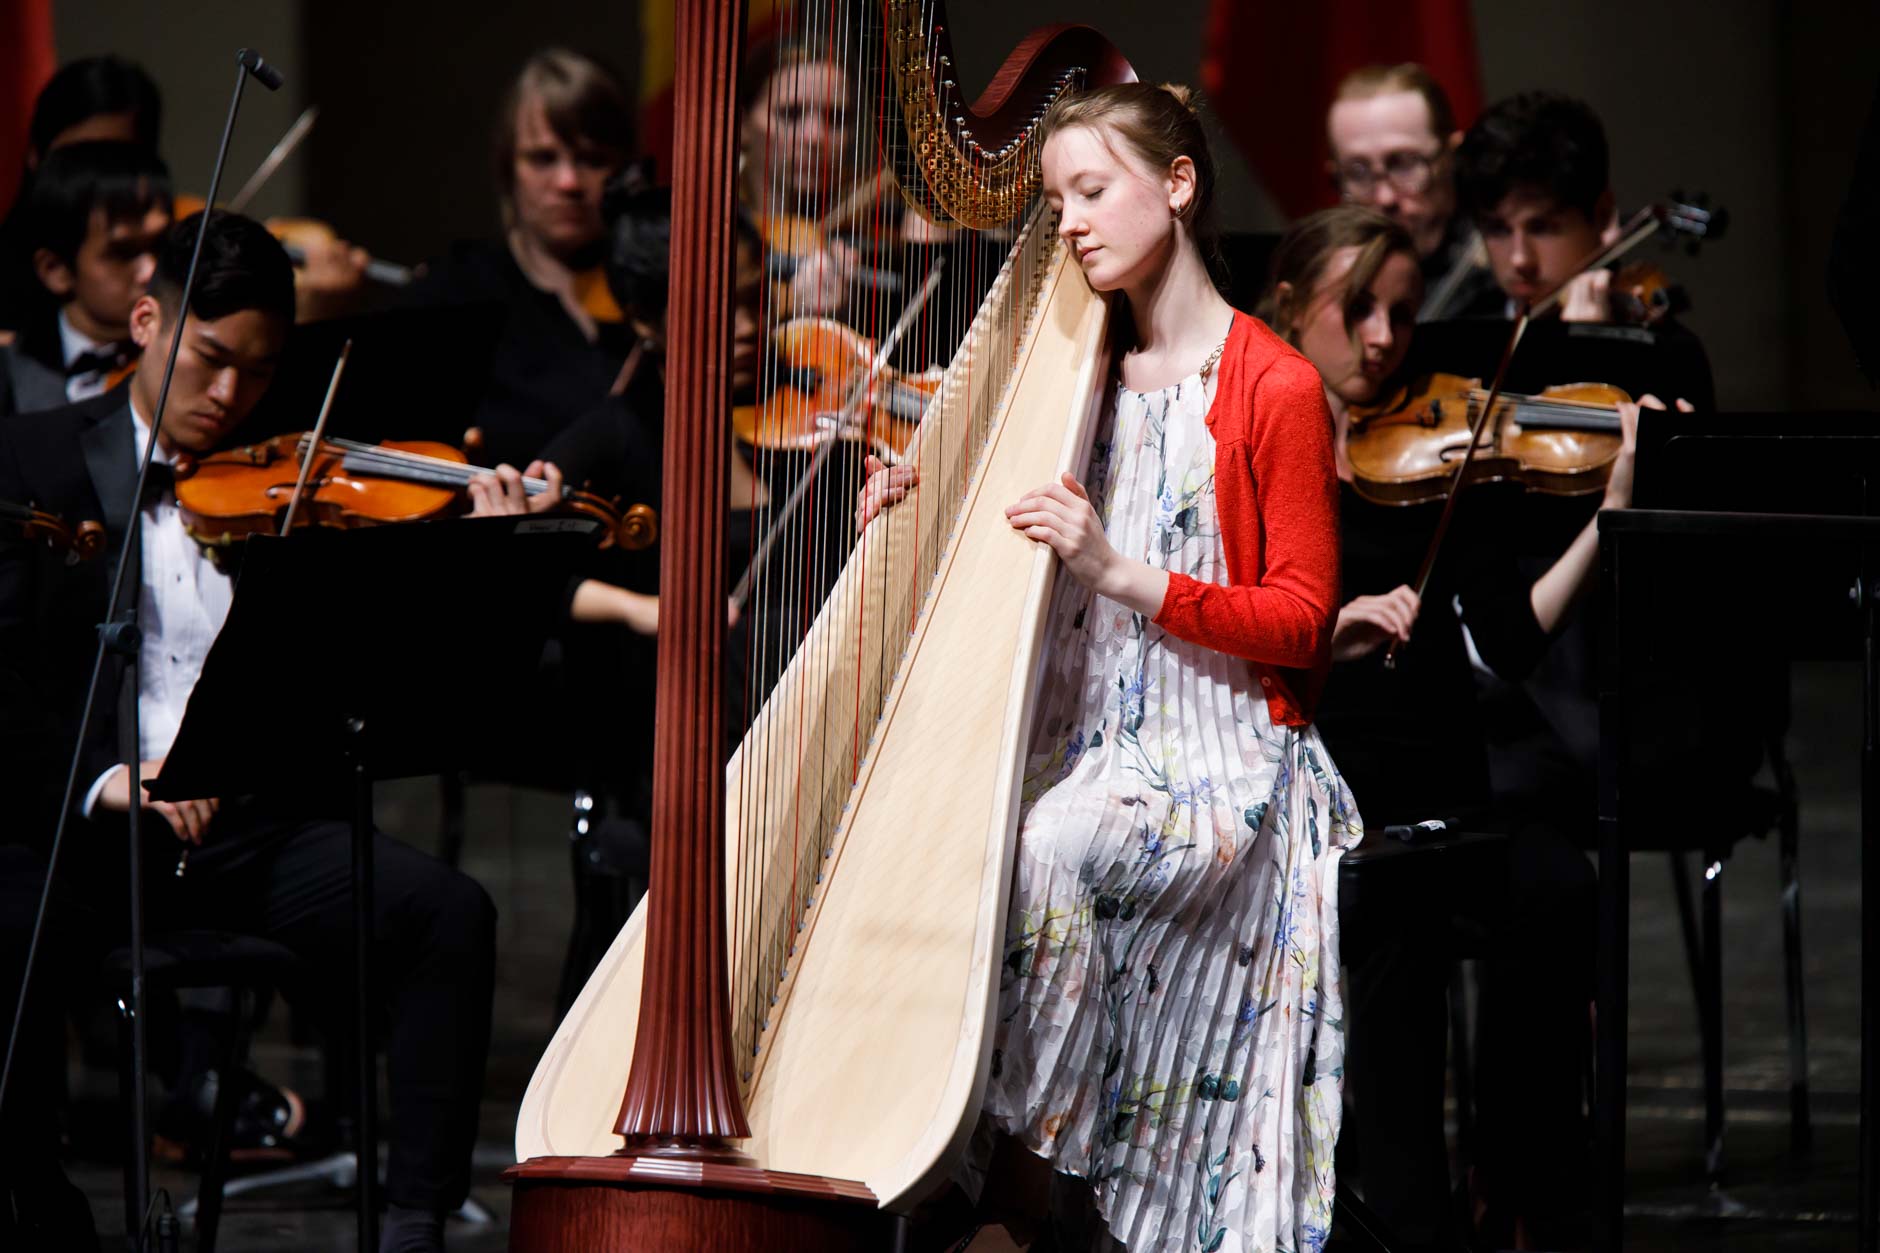 Mathilde Wauters of Belgium performs with the Indiana University Summer Philharmonic Orchestra during the Stage IV concert at the 11th USA International Harp Competition at Indiana University in Bloomington, Indiana on Saturday, July 13, 2019. (Photo by James Brosher)